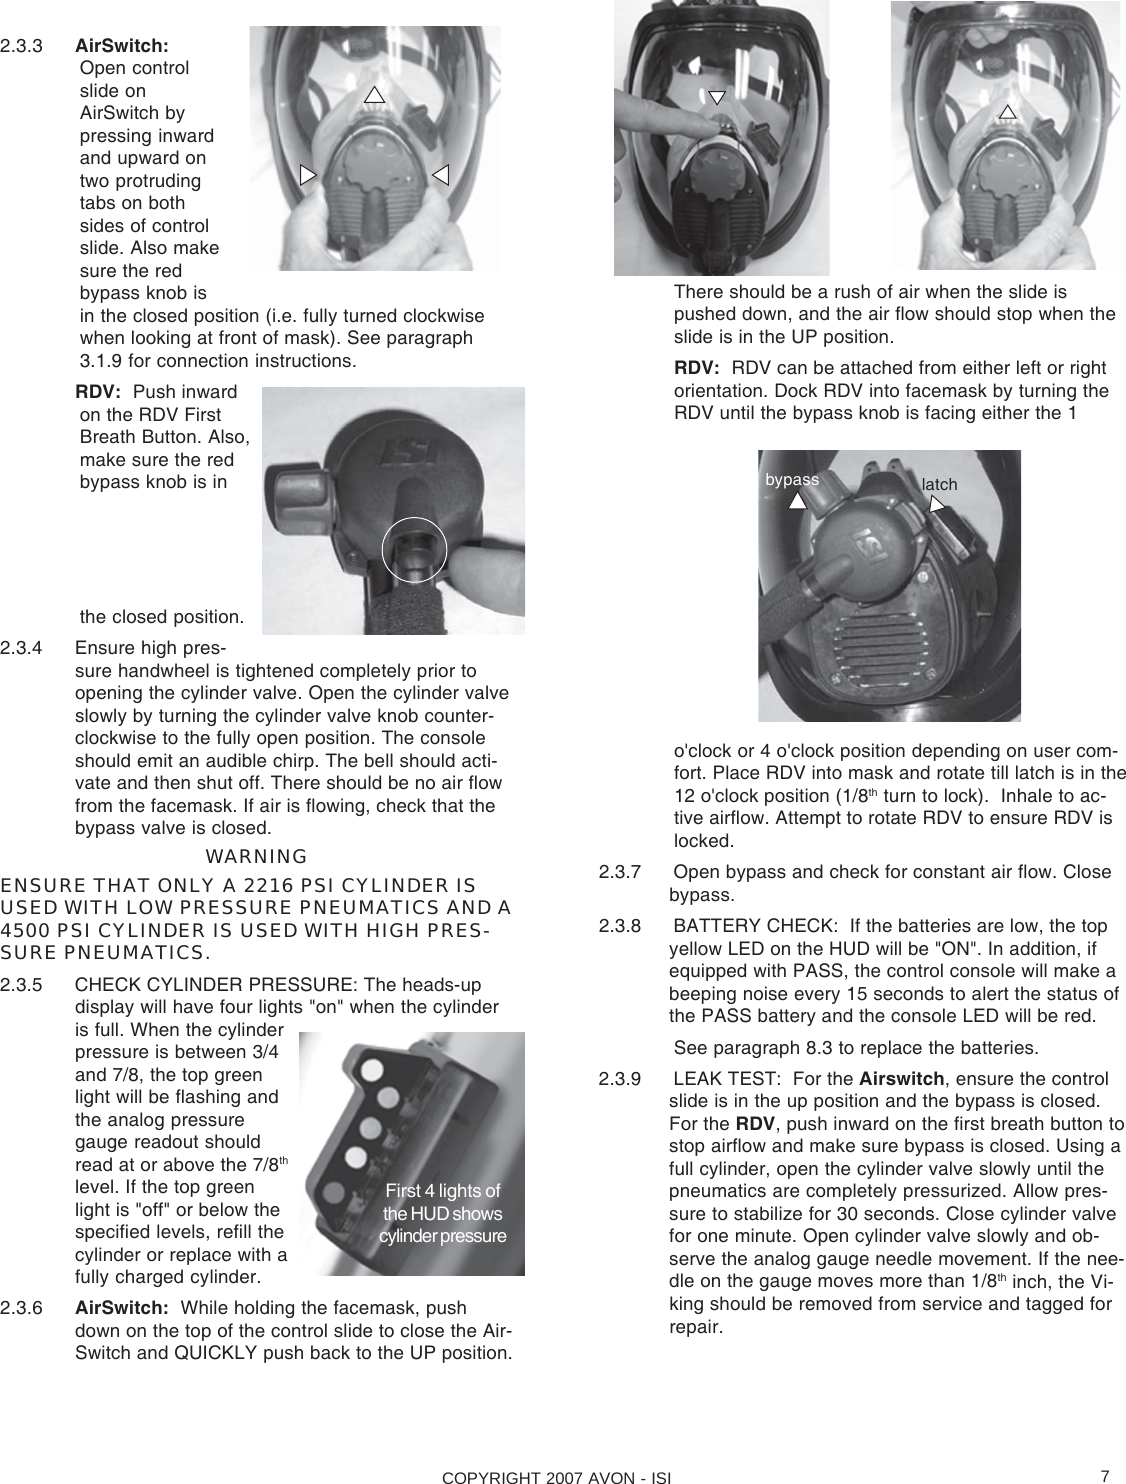 COPYRIGHT 2007 AVON - ISI 72.3.3 AirSwitch:Open controlslide onAirSwitch bypressing inwardand upward ontwo protrudingtabs on bothsides of controlslide. Also makesure the redbypass knob isin the closed position (i.e. fully turned clockwisewhen looking at front of mask). See paragraph3.1.9 for connection instructions.RDV:  Push inwardon the RDV FirstBreath Button. Also,make sure the redbypass knob is inthe closed position.2.3.4 Ensure high pres-sure handwheel is tightened completely prior toopening the cylinder valve. Open the cylinder valveslowly by turning the cylinder valve knob counter-clockwise to the fully open position. The consoleshould emit an audible chirp. The bell should acti-vate and then shut off. There should be no air flowfrom the facemask. If air is flowing, check that thebypass valve is closed.WARNINGENSURE THAT ONLY A 2216 PSI CYLINDER ISUSED WITH LOW PRESSURE PNEUMATICS AND A4500 PSI CYLINDER IS USED WITH HIGH PRES-SURE PNEUMATICS.2.3.5 CHECK CYLINDER PRESSURE: The heads-updisplay will have four lights &quot;on&quot; when the cylinderis full. When the cylinderpressure is between 3/4and 7/8, the top greenlight will be flashing andthe analog pressuregauge readout shouldread at or above the 7/8thlevel. If the top greenlight is &quot;off&quot; or below thespecified levels, refill thecylinder or replace with afully charged cylinder.2.3.6 AirSwitch:  While holding the facemask, pushdown on the top of the control slide to close the Air-Switch and QUICKLY push back to the UP position.First 4 lights ofthe HUD showscylinder pressurebypass latchThere should be a rush of air when the slide ispushed down, and the air flow should stop when theslide is in the UP position.RDV:  RDV can be attached from either left or rightorientation. Dock RDV into facemask by turning theRDV until the bypass knob is facing either the 1o&apos;clock or 4 o&apos;clock position depending on user com-fort. Place RDV into mask and rotate till latch is in the12 o&apos;clock position (1/8th turn to lock).  Inhale to ac-tive airflow. Attempt to rotate RDV to ensure RDV islocked.2.3.7 Open bypass and check for constant air flow. Closebypass.2.3.8 BATTERY CHECK:  If the batteries are low, the topyellow LED on the HUD will be &quot;ON&quot;. In addition, ifequipped with PASS, the control console will make abeeping noise every 15 seconds to alert the status ofthe PASS battery and the console LED will be red.See paragraph 8.3 to replace the batteries.2.3.9 LEAK TEST:  For the Airswitch, ensure the controlslide is in the up position and the bypass is closed.For the RDV, push inward on the first breath button tostop airflow and make sure bypass is closed. Using afull cylinder, open the cylinder valve slowly until thepneumatics are completely pressurized. Allow pres-sure to stabilize for 30 seconds. Close cylinder valvefor one minute. Open cylinder valve slowly and ob-serve the analog gauge needle movement. If the nee-dle on the gauge moves more than 1/8th inch, the Vi-king should be removed from service and tagged forrepair.